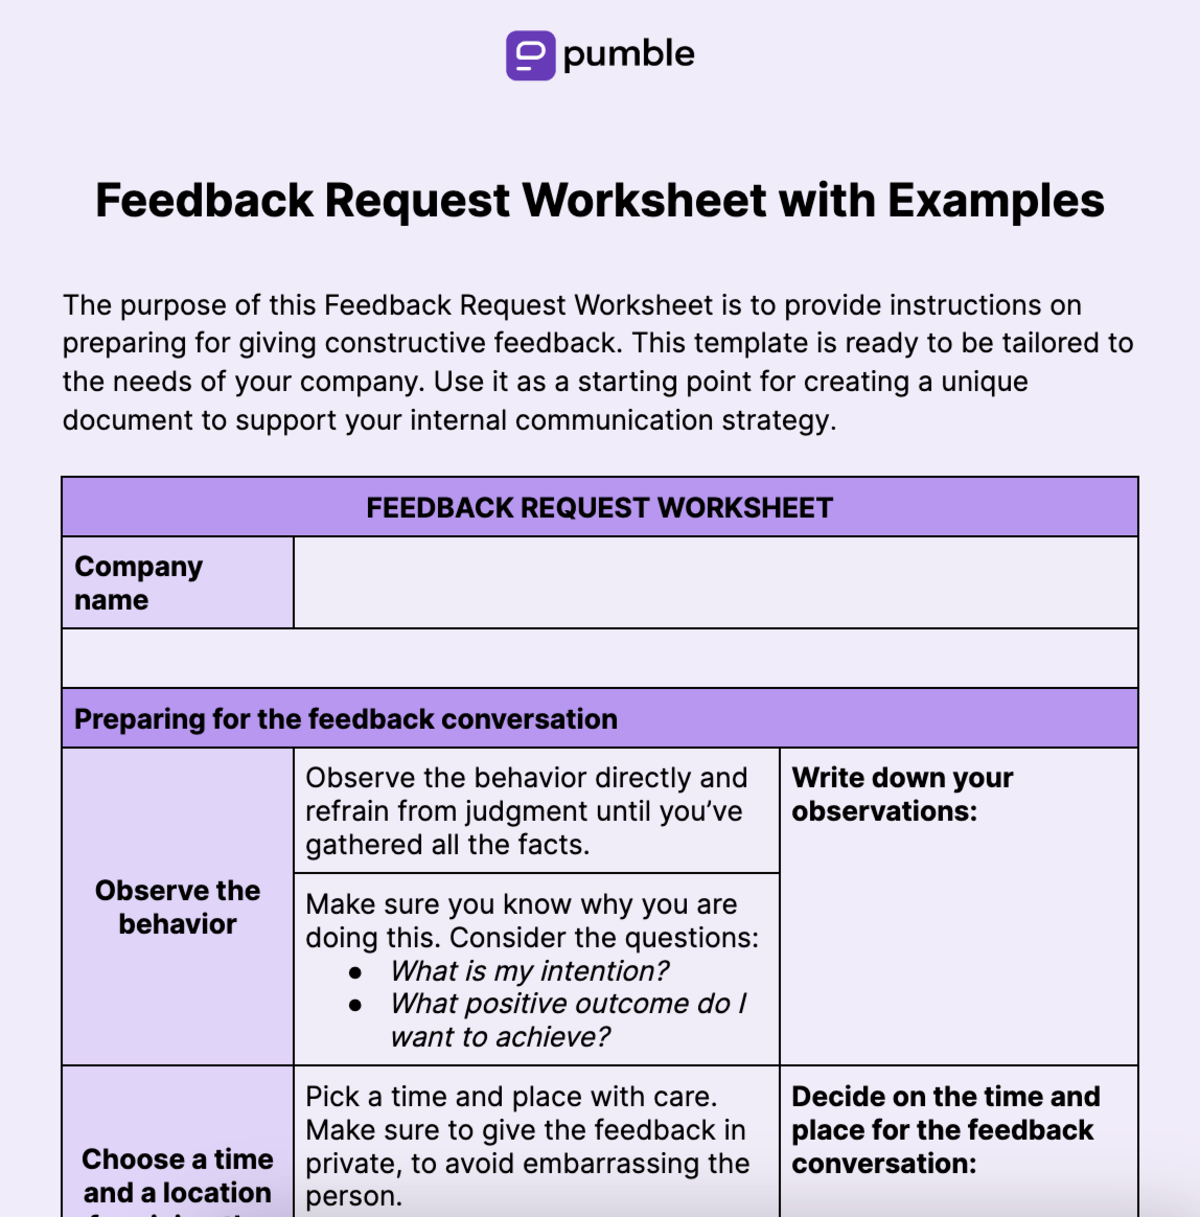 Feedback Request Worksheet with Examples